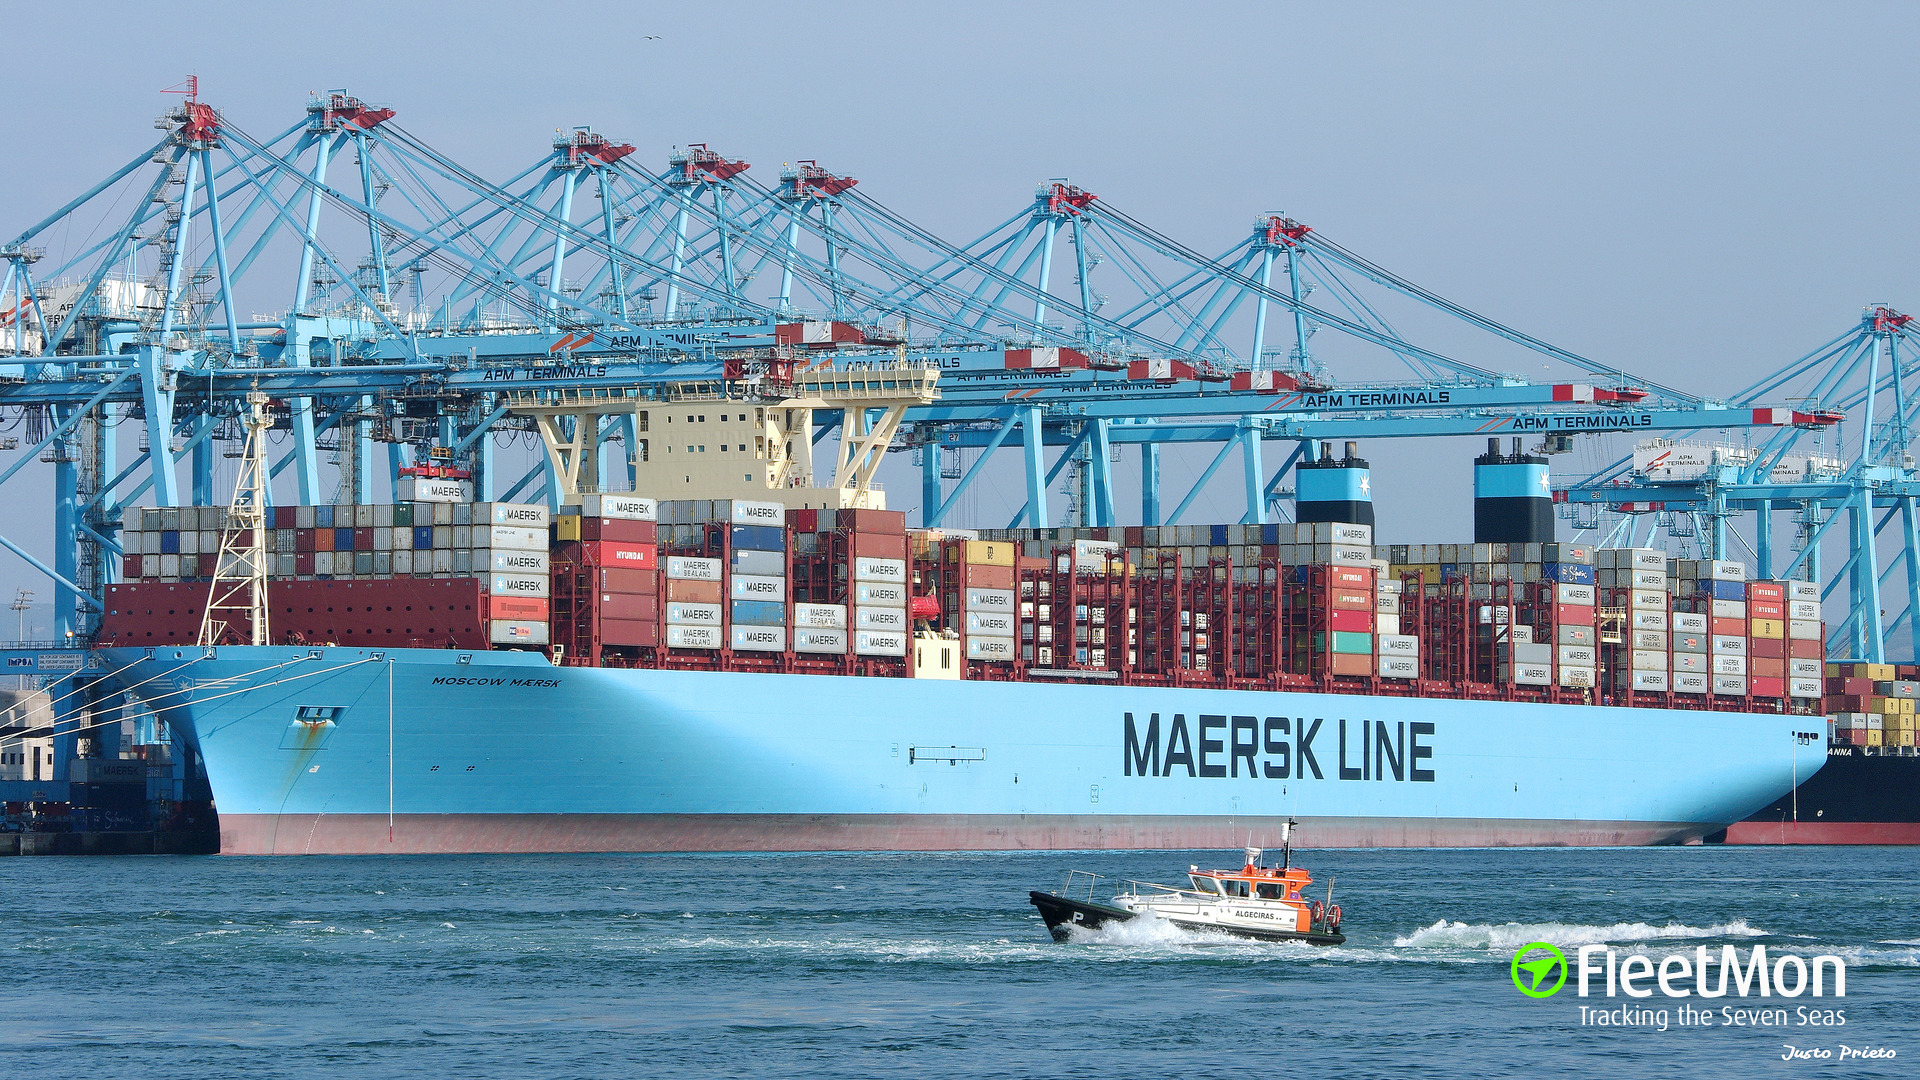 MOSCOW MAERSK